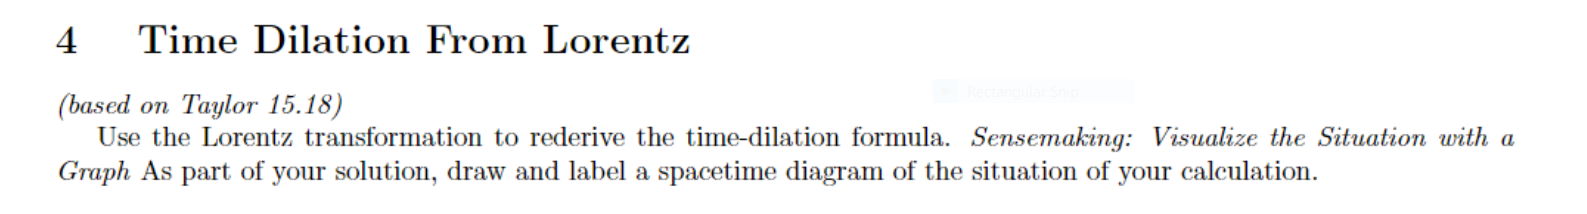 https://www.chegg.com/homework-help/questions-and-answers/4-time-dilation-lorentz-based-taylor-1518-use-lorentz-transformation-rederive-time-dilatio-q102967523